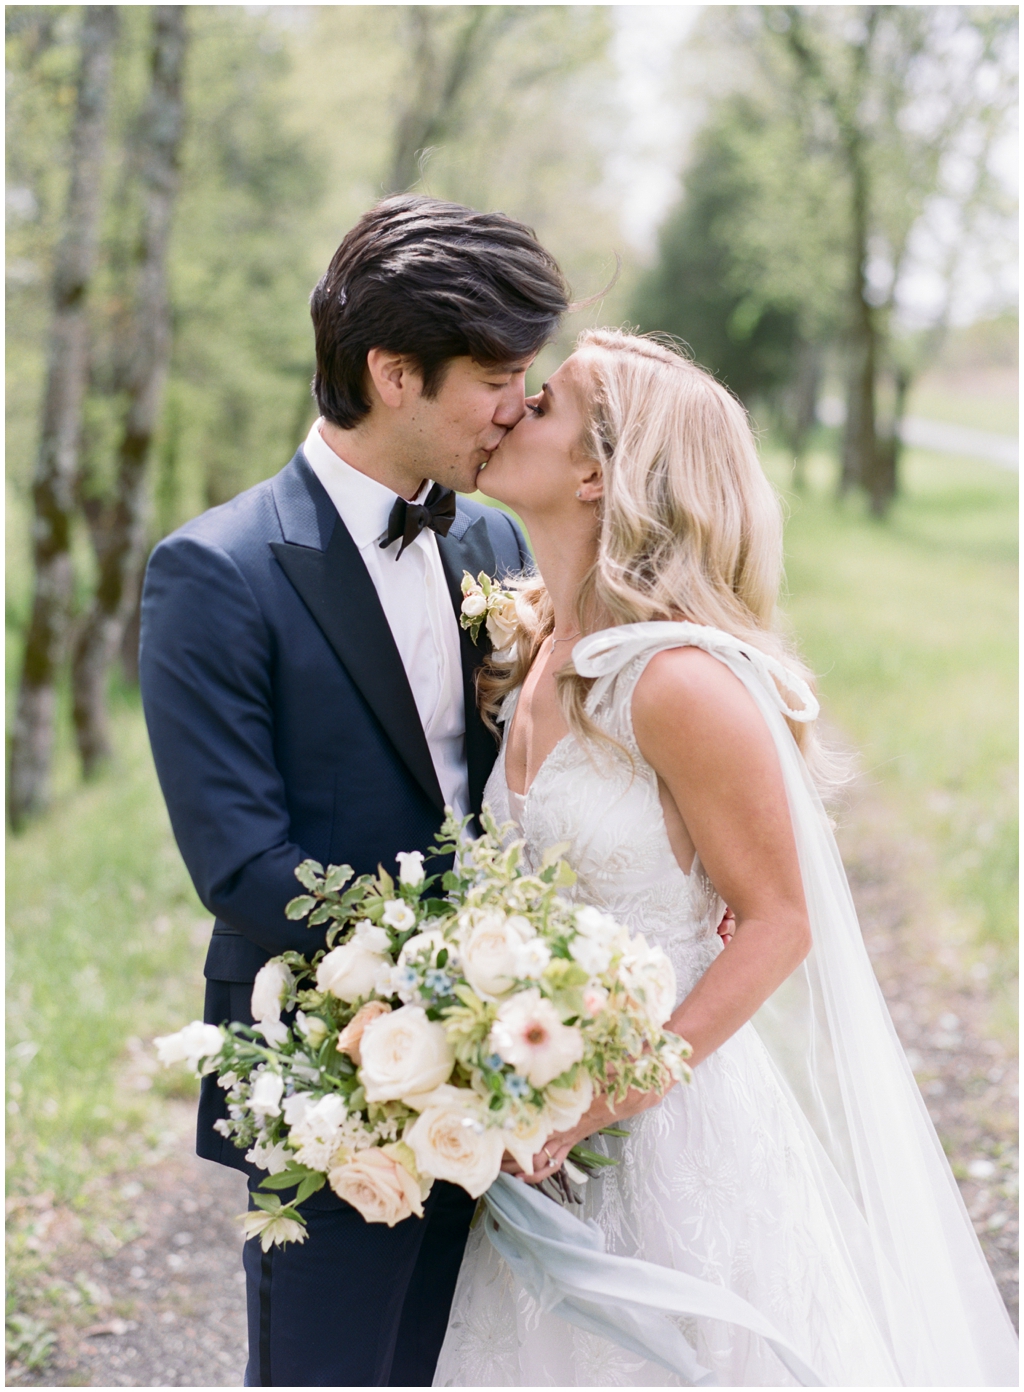 Bride and groom share a kiss at their portraits